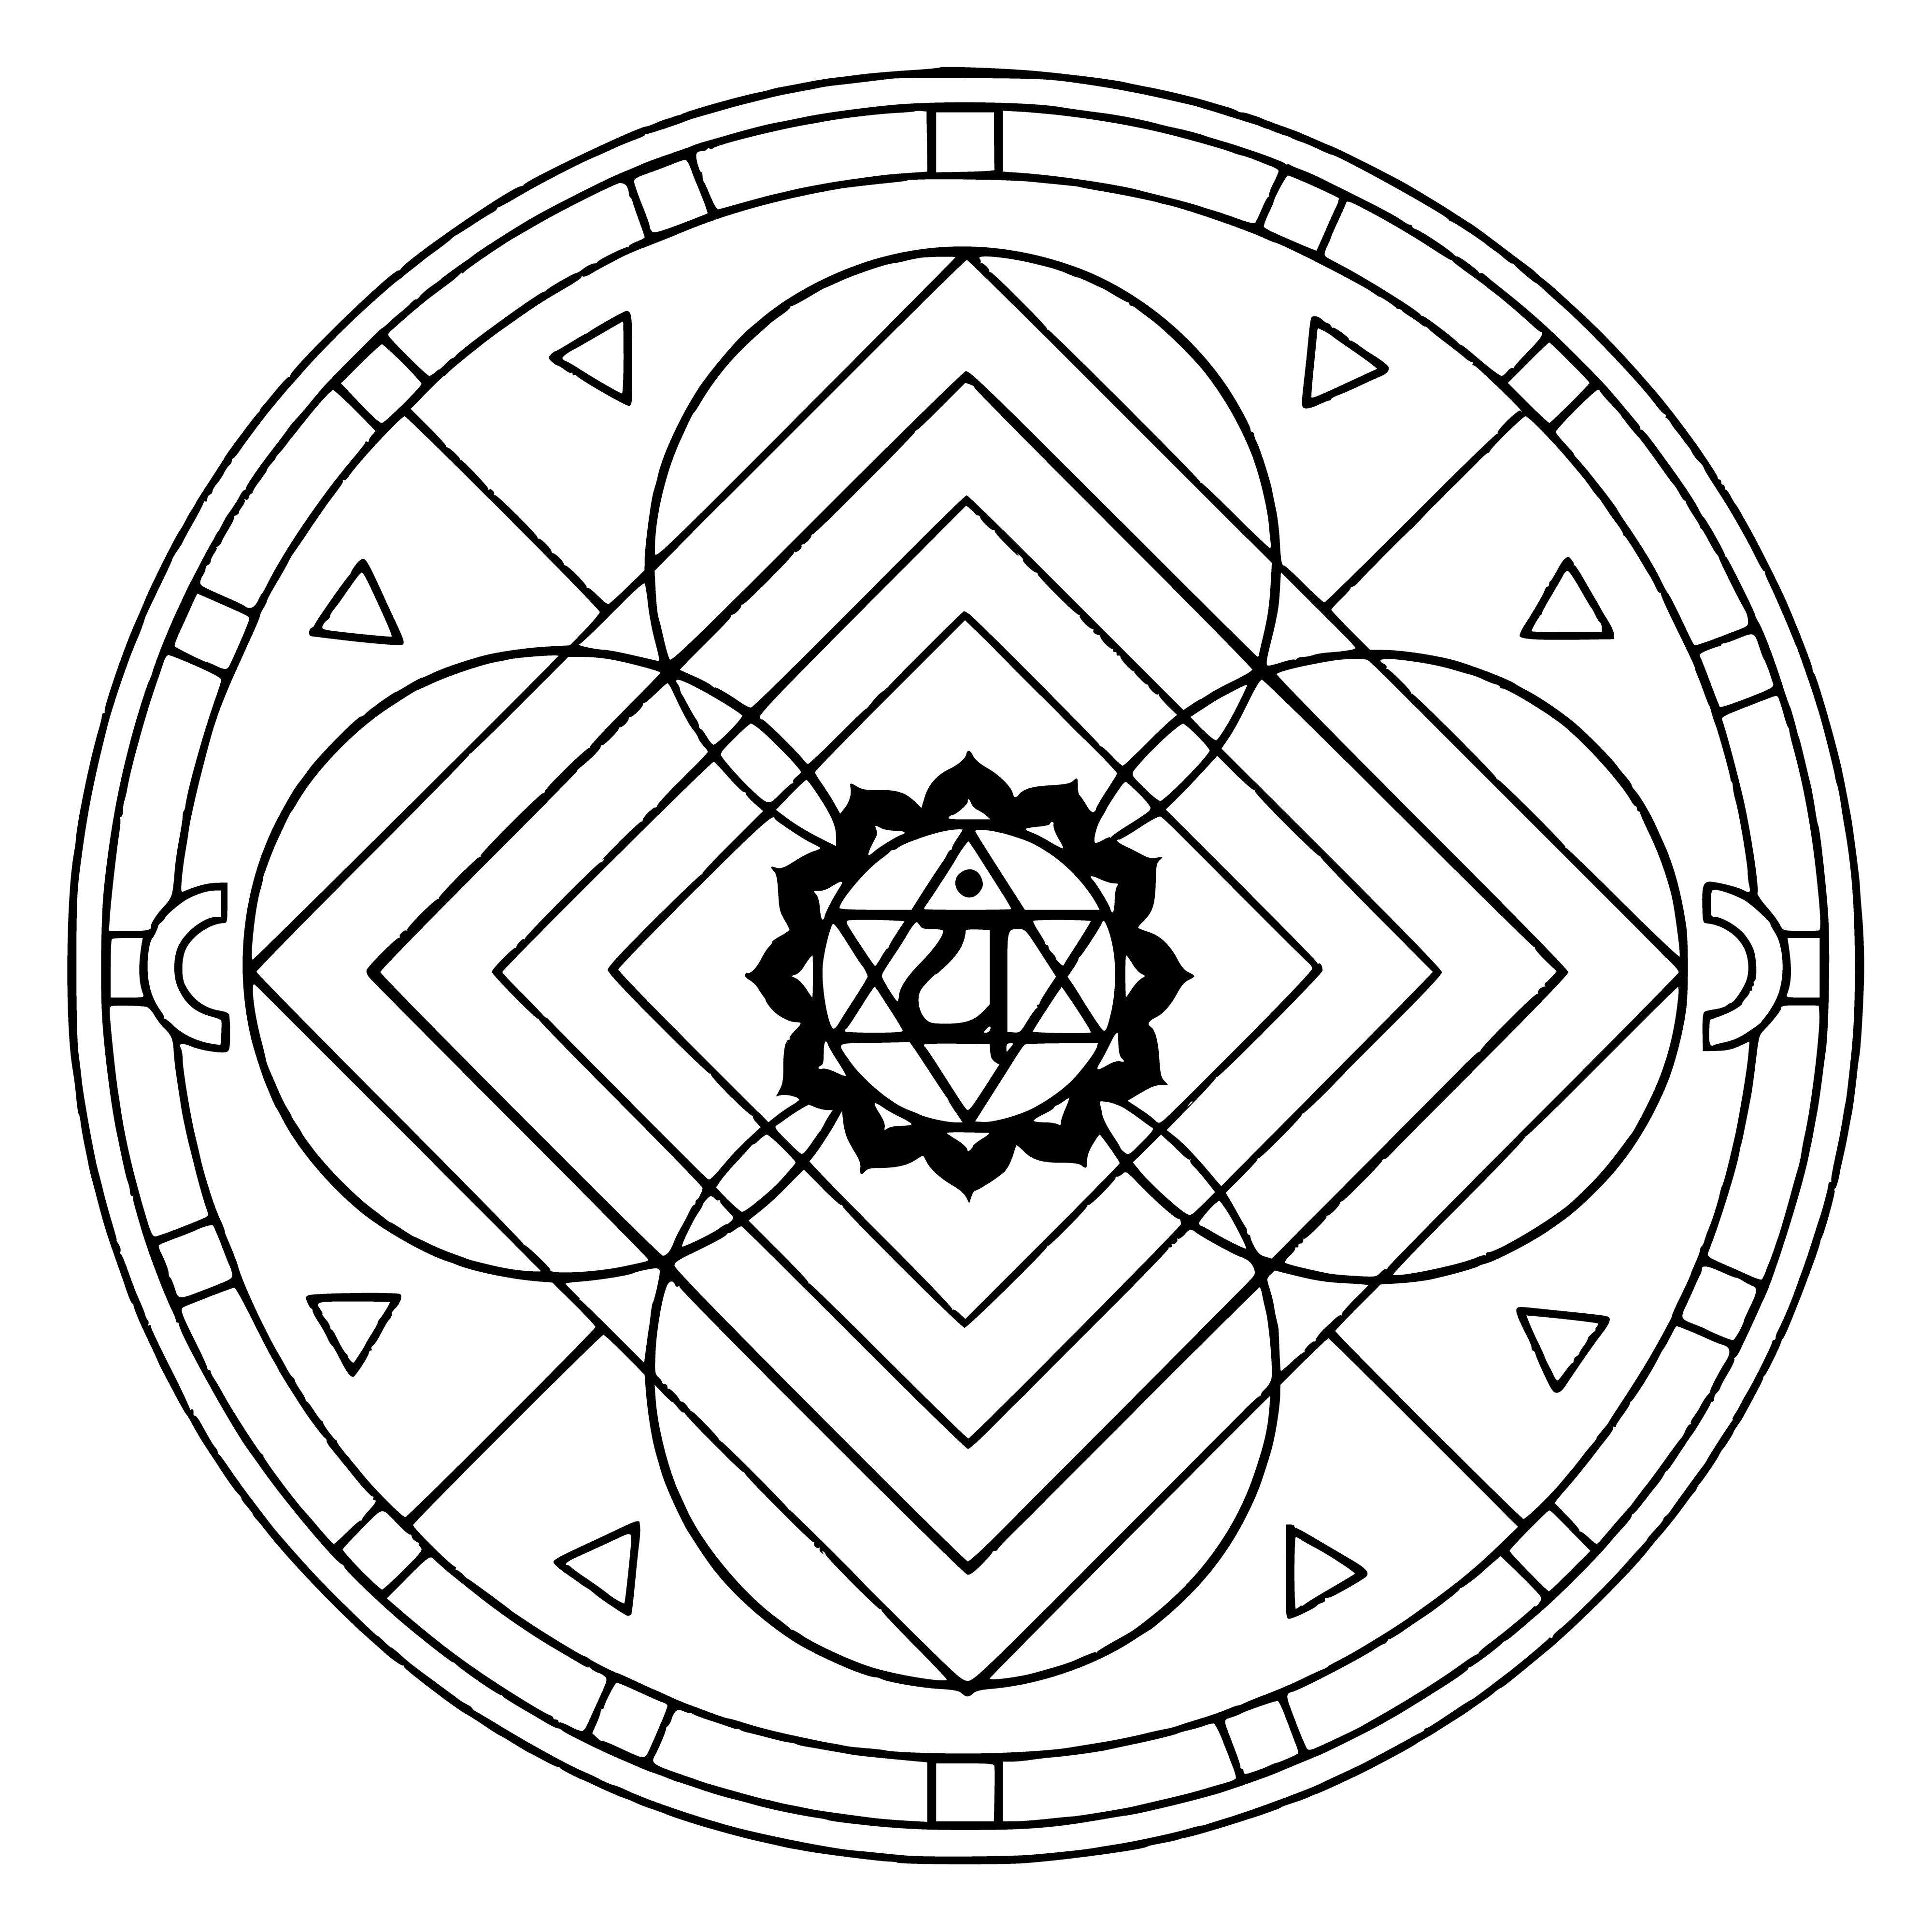 coloring page: This mandala represents the Anahata chakra, the heart chakra associated with the element of Air. Symbolized by a lotus flower, it helps us love and forgive, and the colors invoke peace and calm.